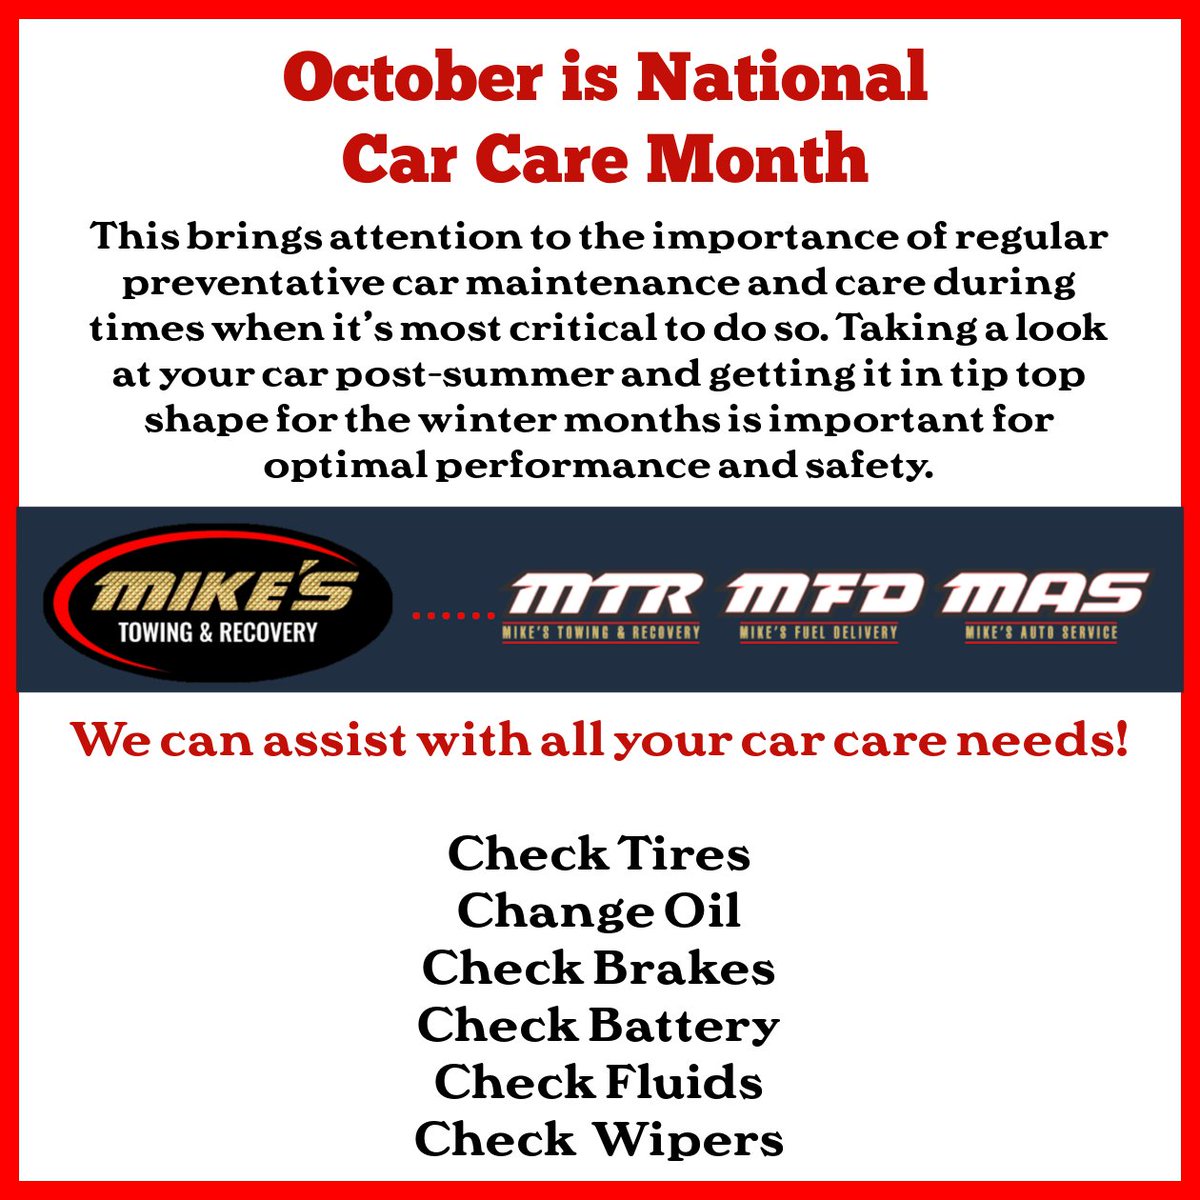 Call to schedule an appointment today! 908-722-2122
#mikesofnj #mikesautoservice #njinspectioncenter #tires #batteryreplacement #oilchanges #wiperblades #steering #heat